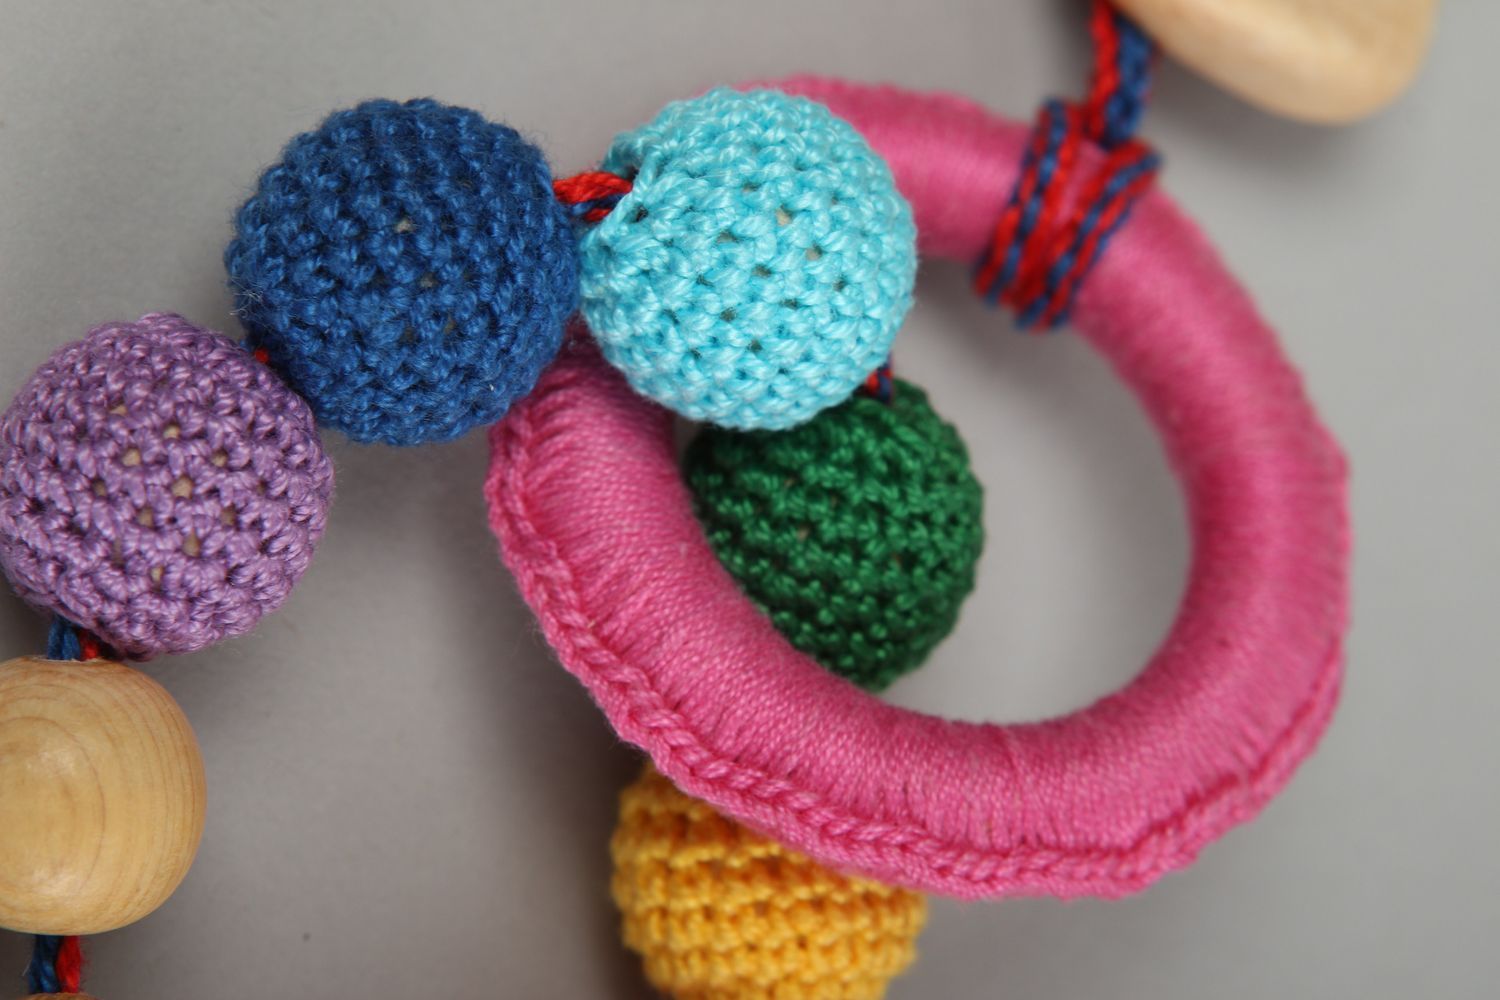 Handmade wooden teething toy childrens toys baby toys crochet ideas small gifts photo 3